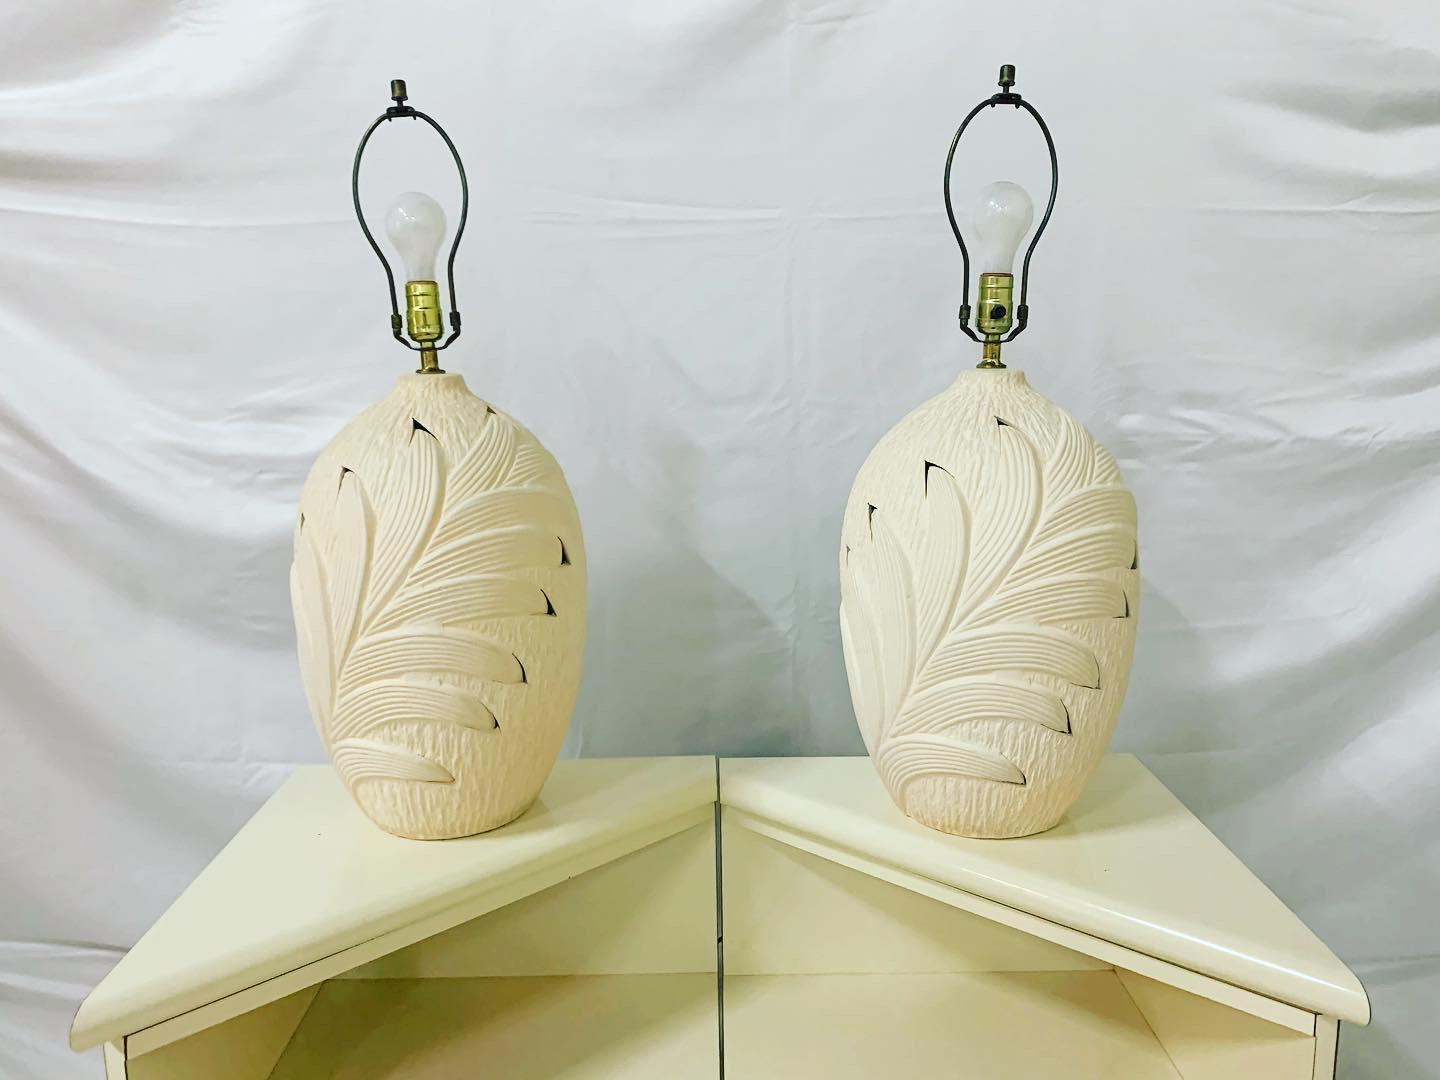 Vintage pair of 80s table lamps in Serge Roche styling made by Harris lamp company. Large urn shaped bases are done of all beige plaster decorated with an overlapping bas relief palm frond leaf pattern. They are signed at the base with ‘Harris lamps